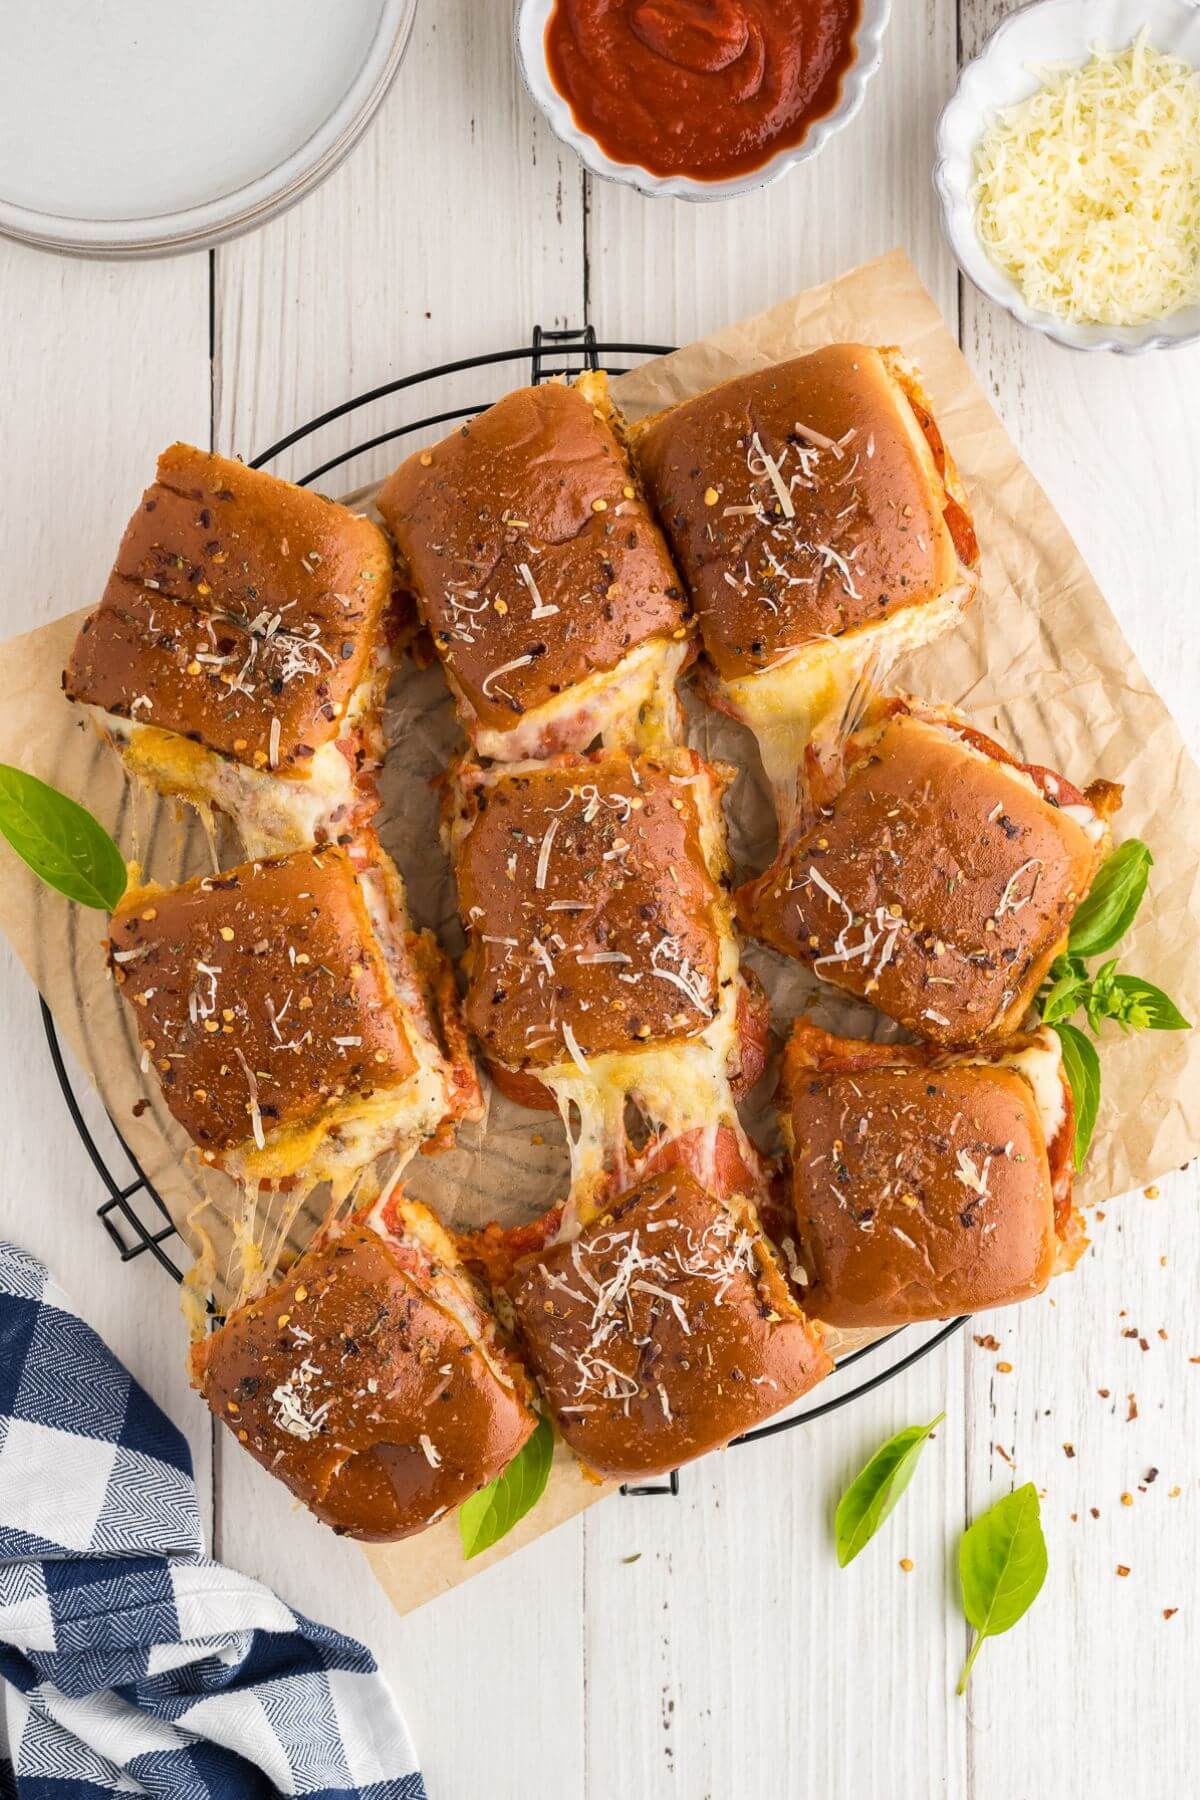 Pizza sliders on plate for serving with dipping sauce.